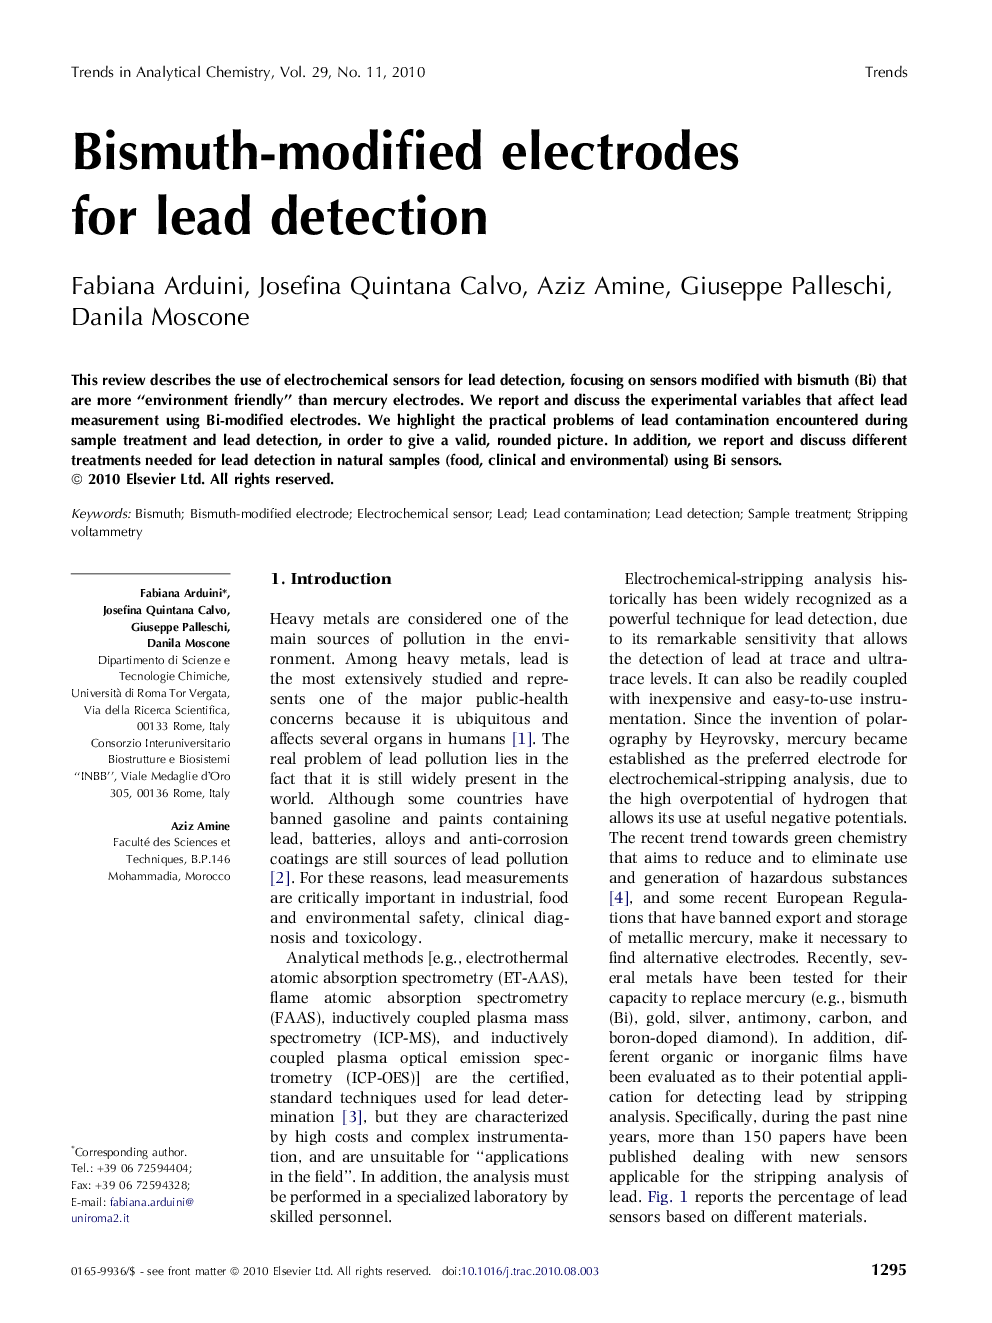 Bismuth-modified electrodes for lead detection